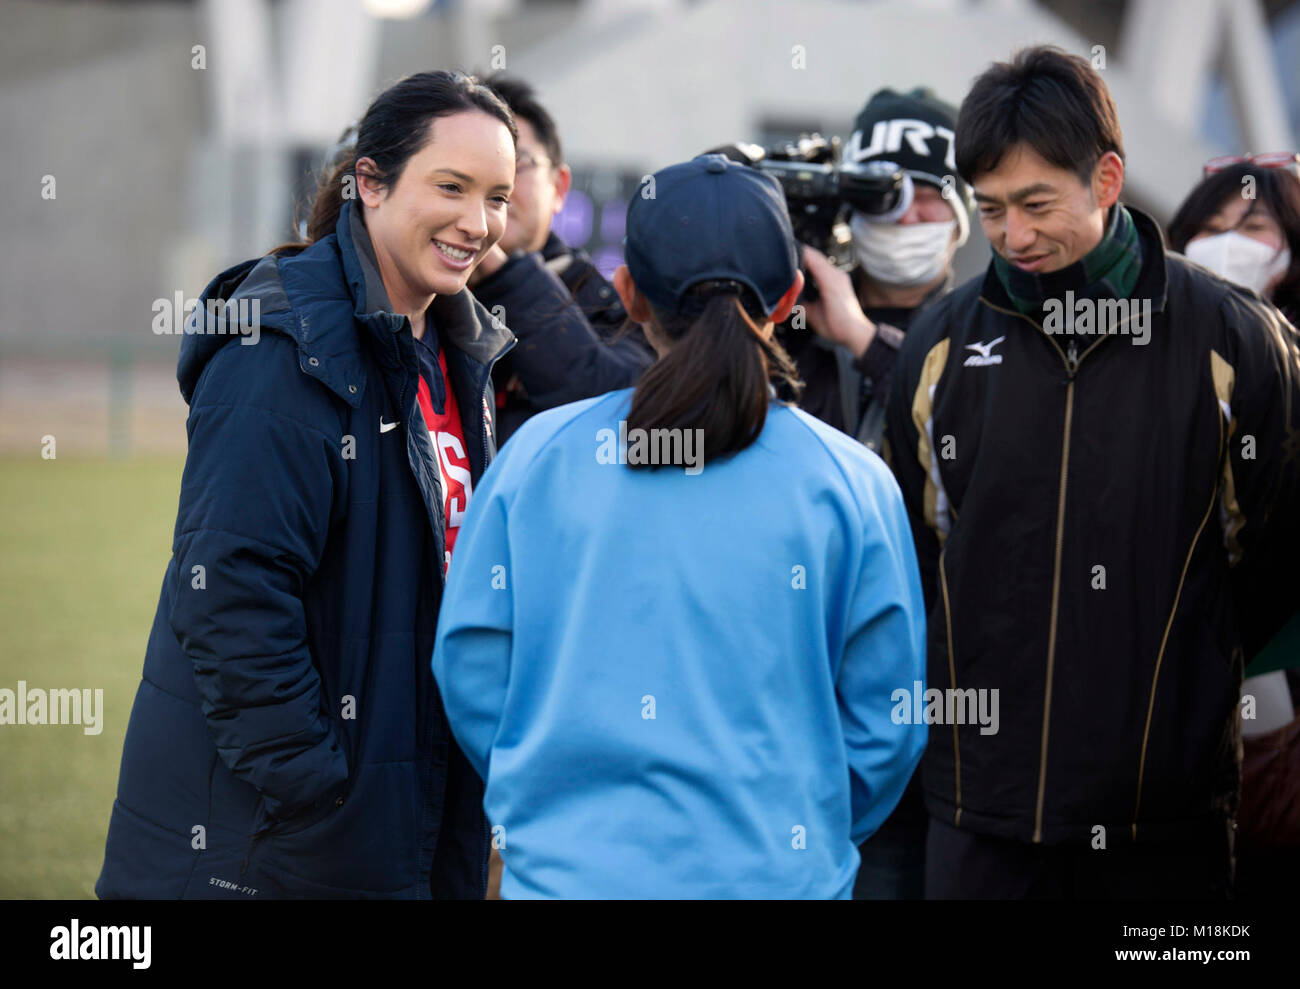 Valerie Arioto, an infielder with the U.S.A. National Women’s Softball team, speaks to a teenager from the Higashi Middle School softball team at the new Kizuna stadium in Iwakuni City, Japan, Jan. 25, 2018. The U.S.A National Women’s Softball team visited players from middle and elementary schools to practice together. The intent of the U.S. softball team’s visit was to determine if the stadium is suitable for the team to practice and play future games at. The stadium is a hallmark of what the U.S.-Japan friendship has accomplished in Iwakuni City. Everything from the dogwood trees planted ju Stock Photo